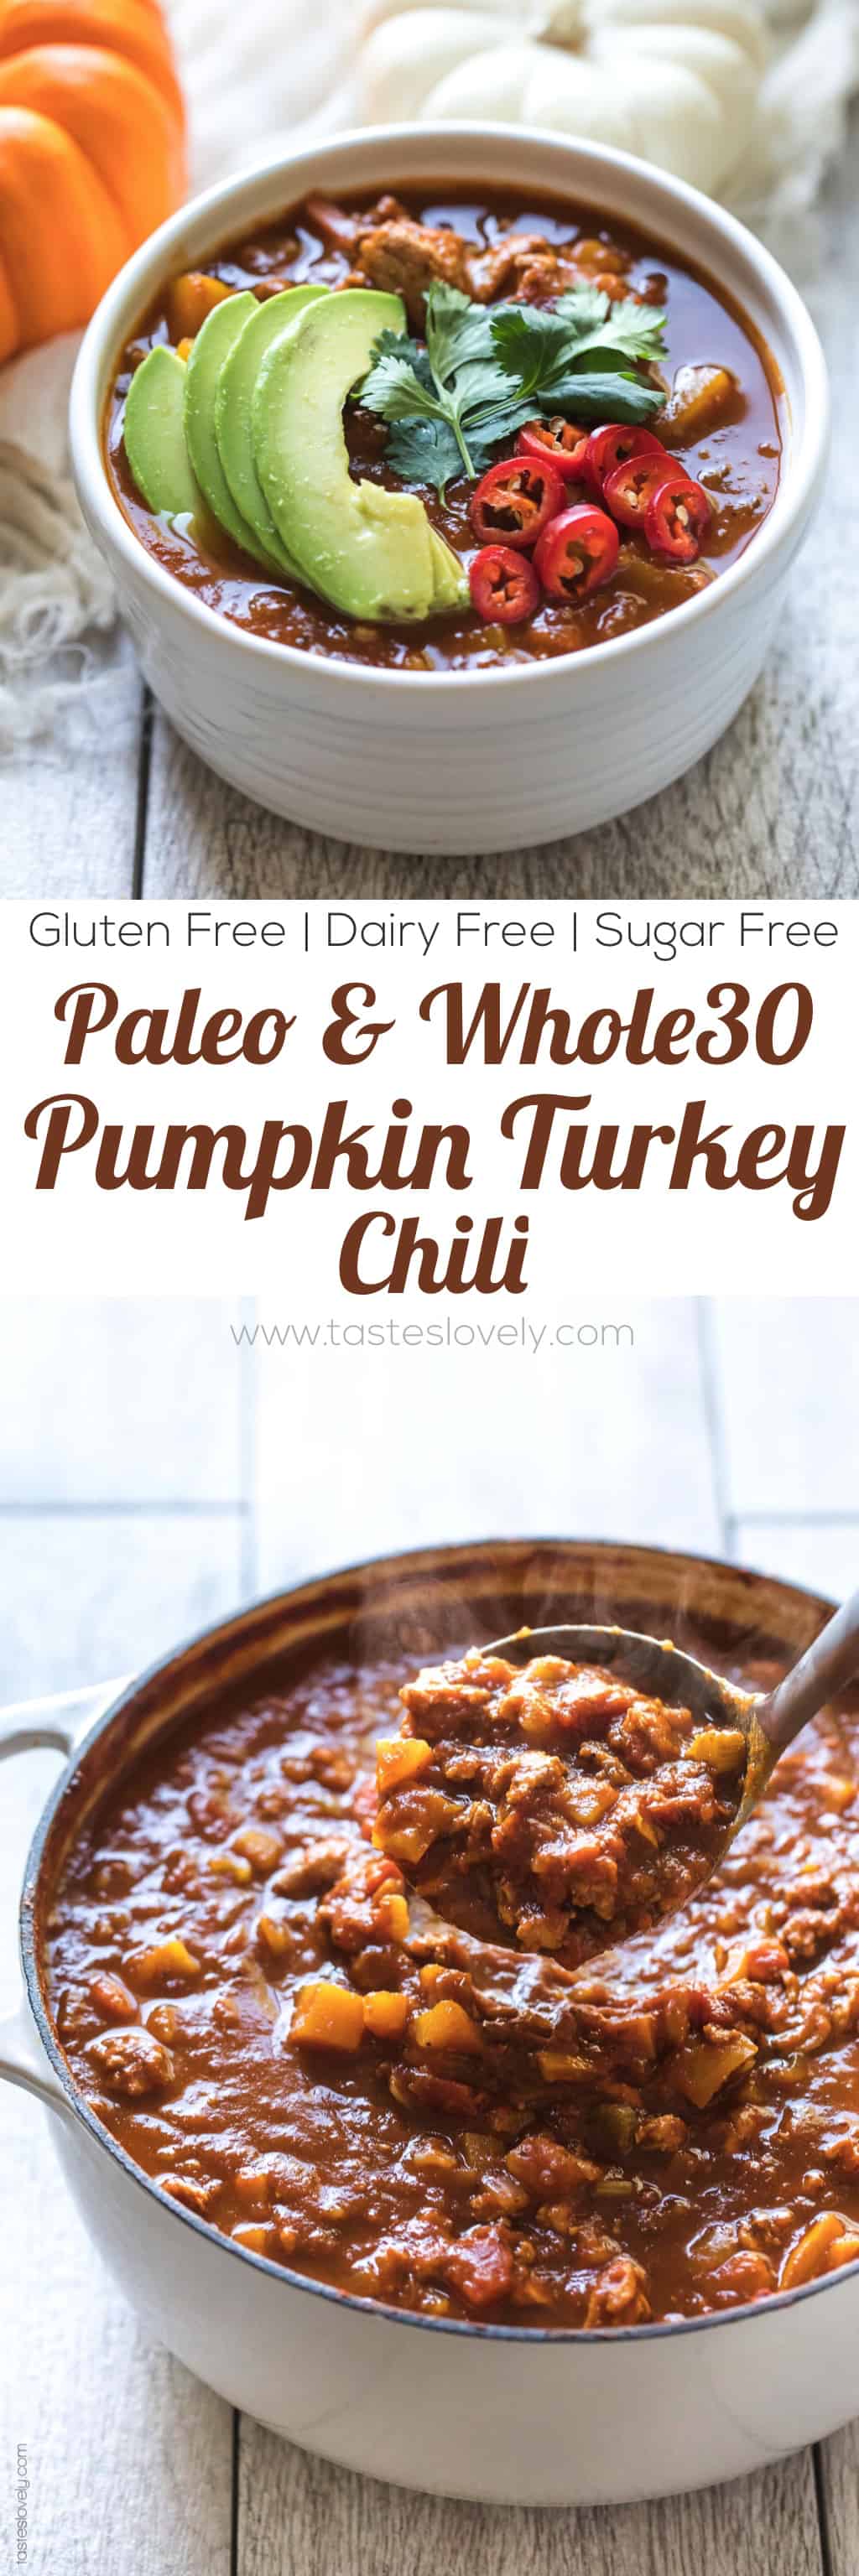 Paleo & Whole30 Pumpkin Turkey Chili Recipe - a no bean chili recipe you can make on the stovetop or in your slow cooker! Dairy free, gluten free, sugar free, clean eating.